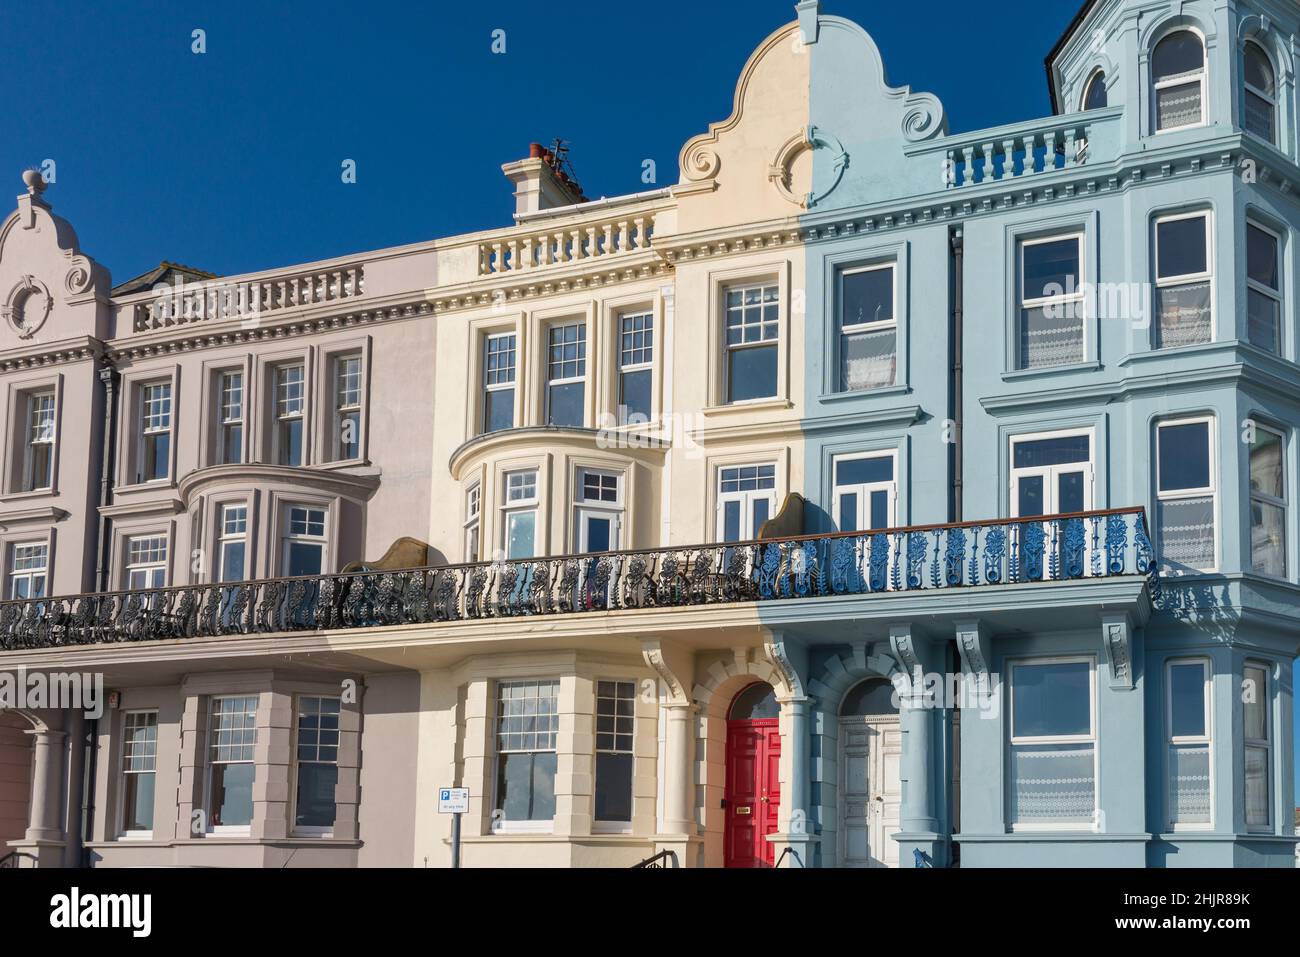 Elegant painted Georgian style buildings in Grand Parade, Plymouth Hoe, Devon Stock Photo